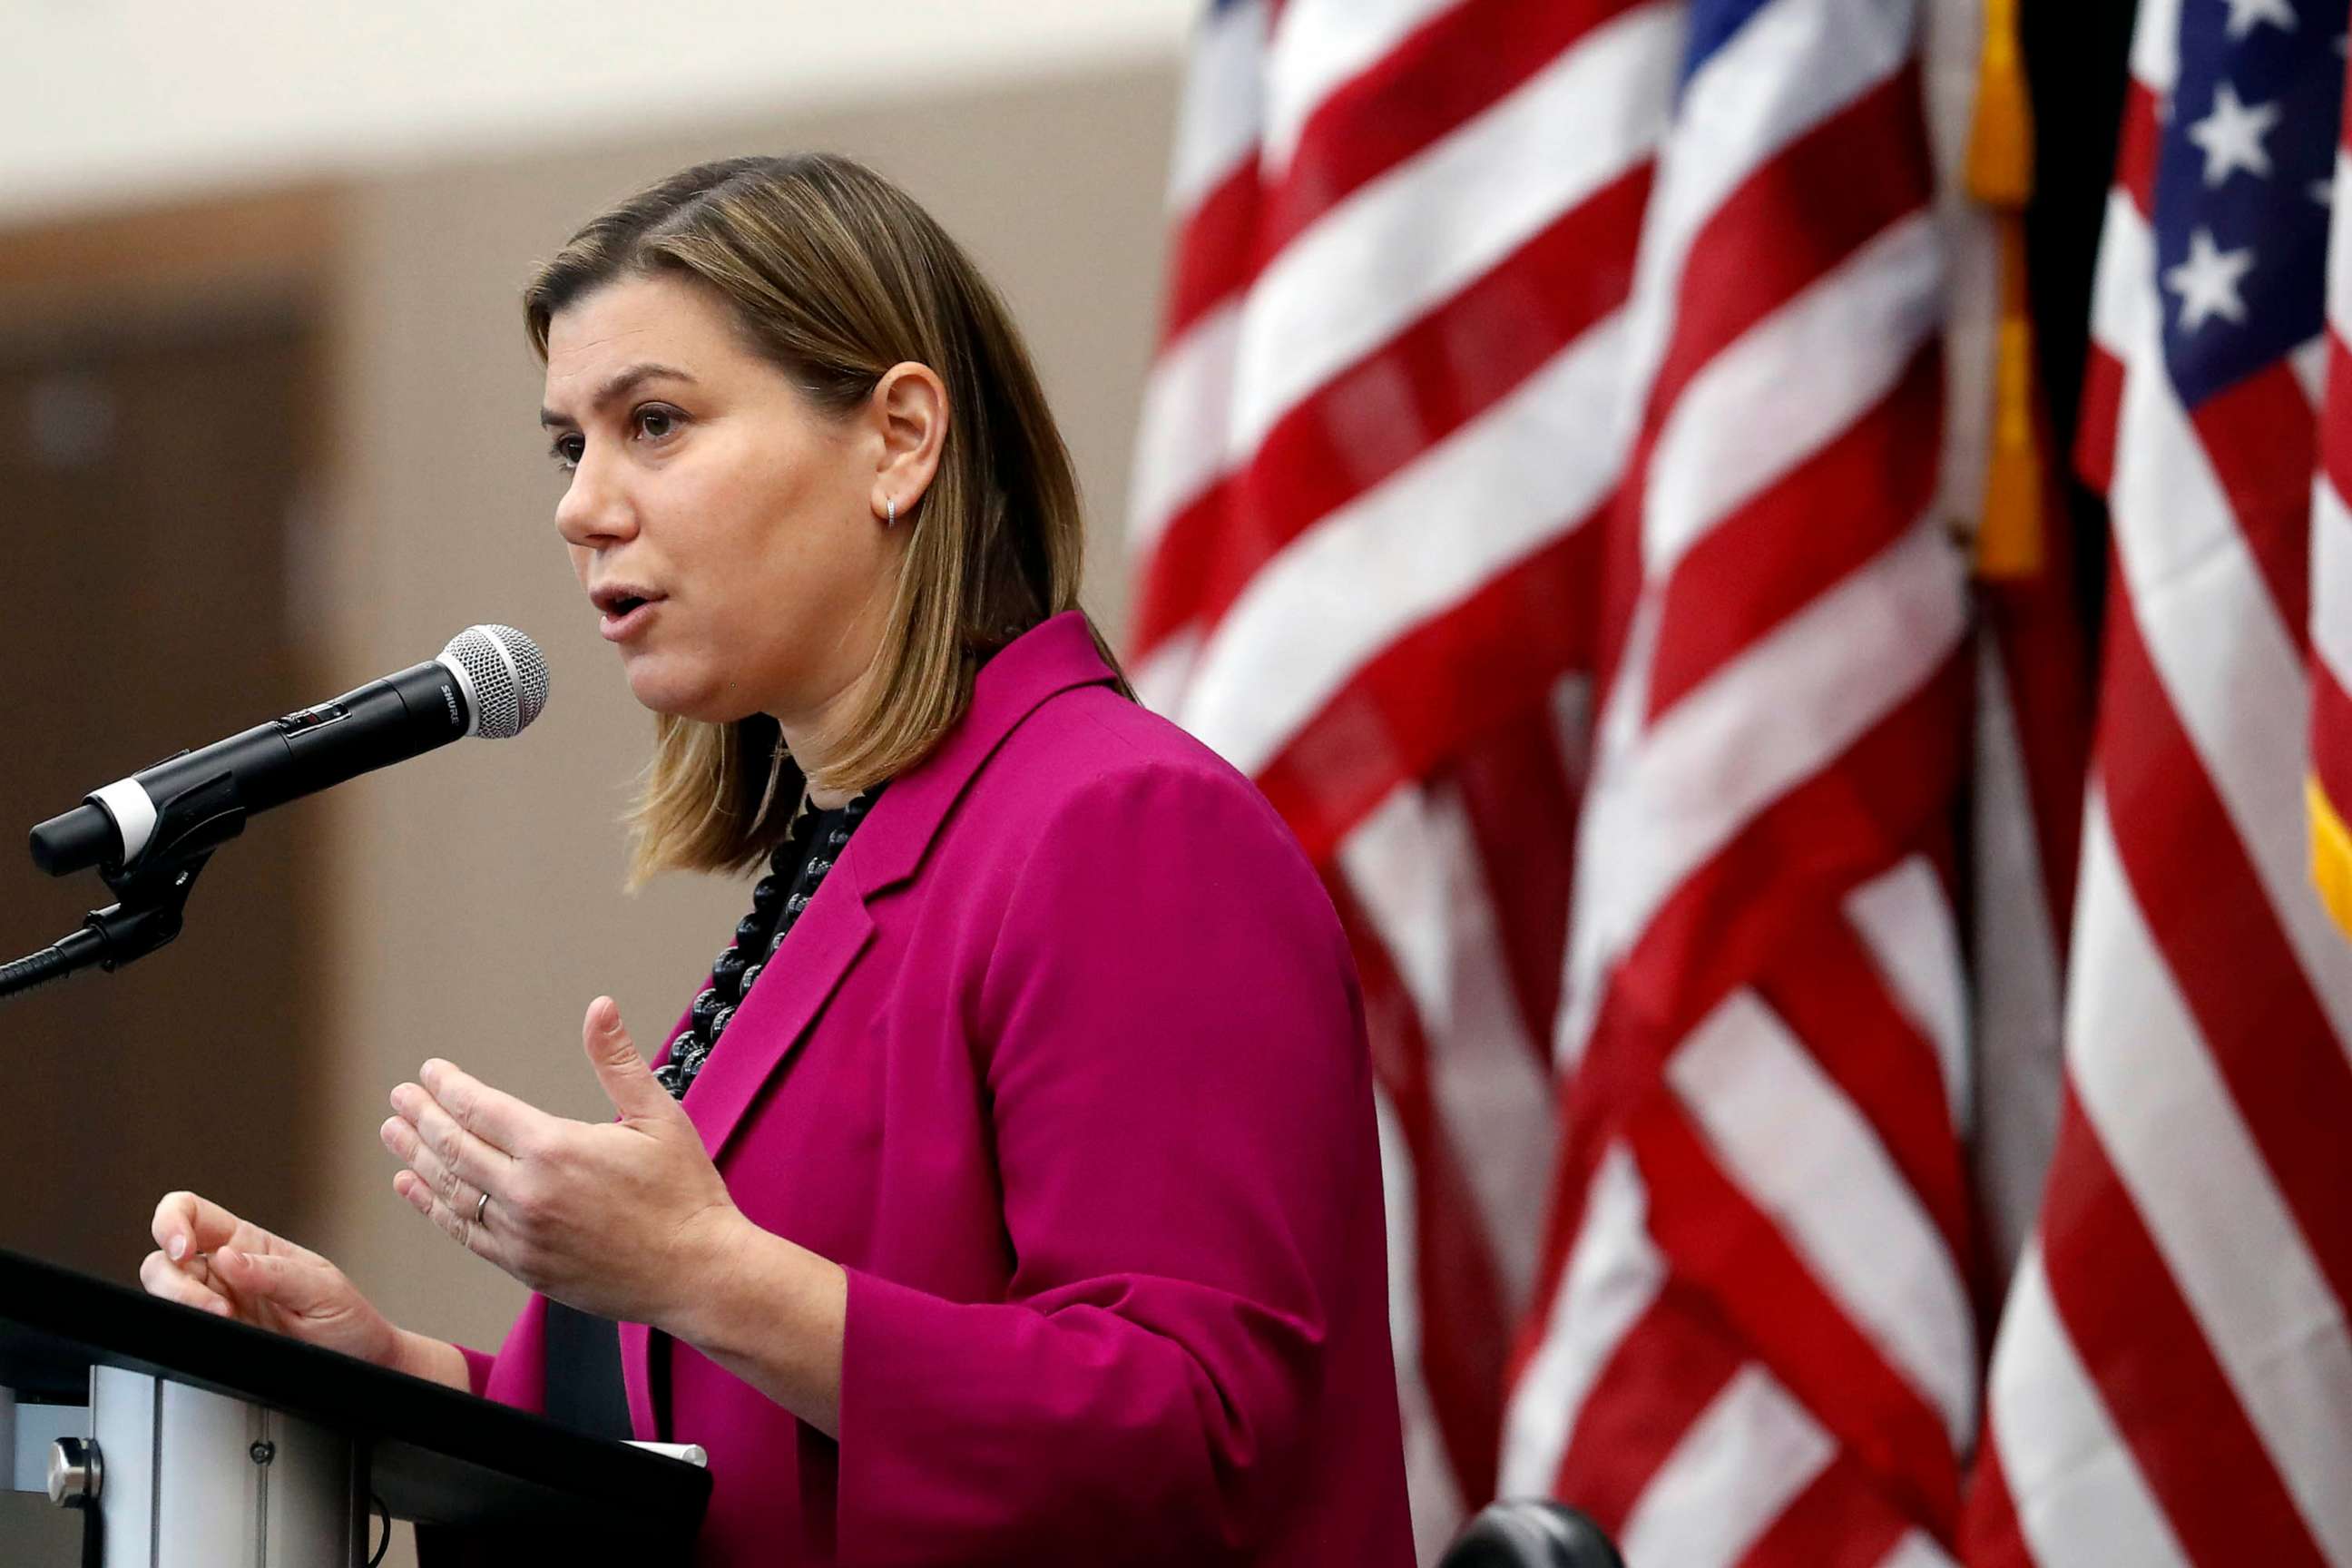 PHOTO: FILE - Rep. Elissa Slotkin speaks during an event in Rochester, Mich., Dec. 16, 2019.